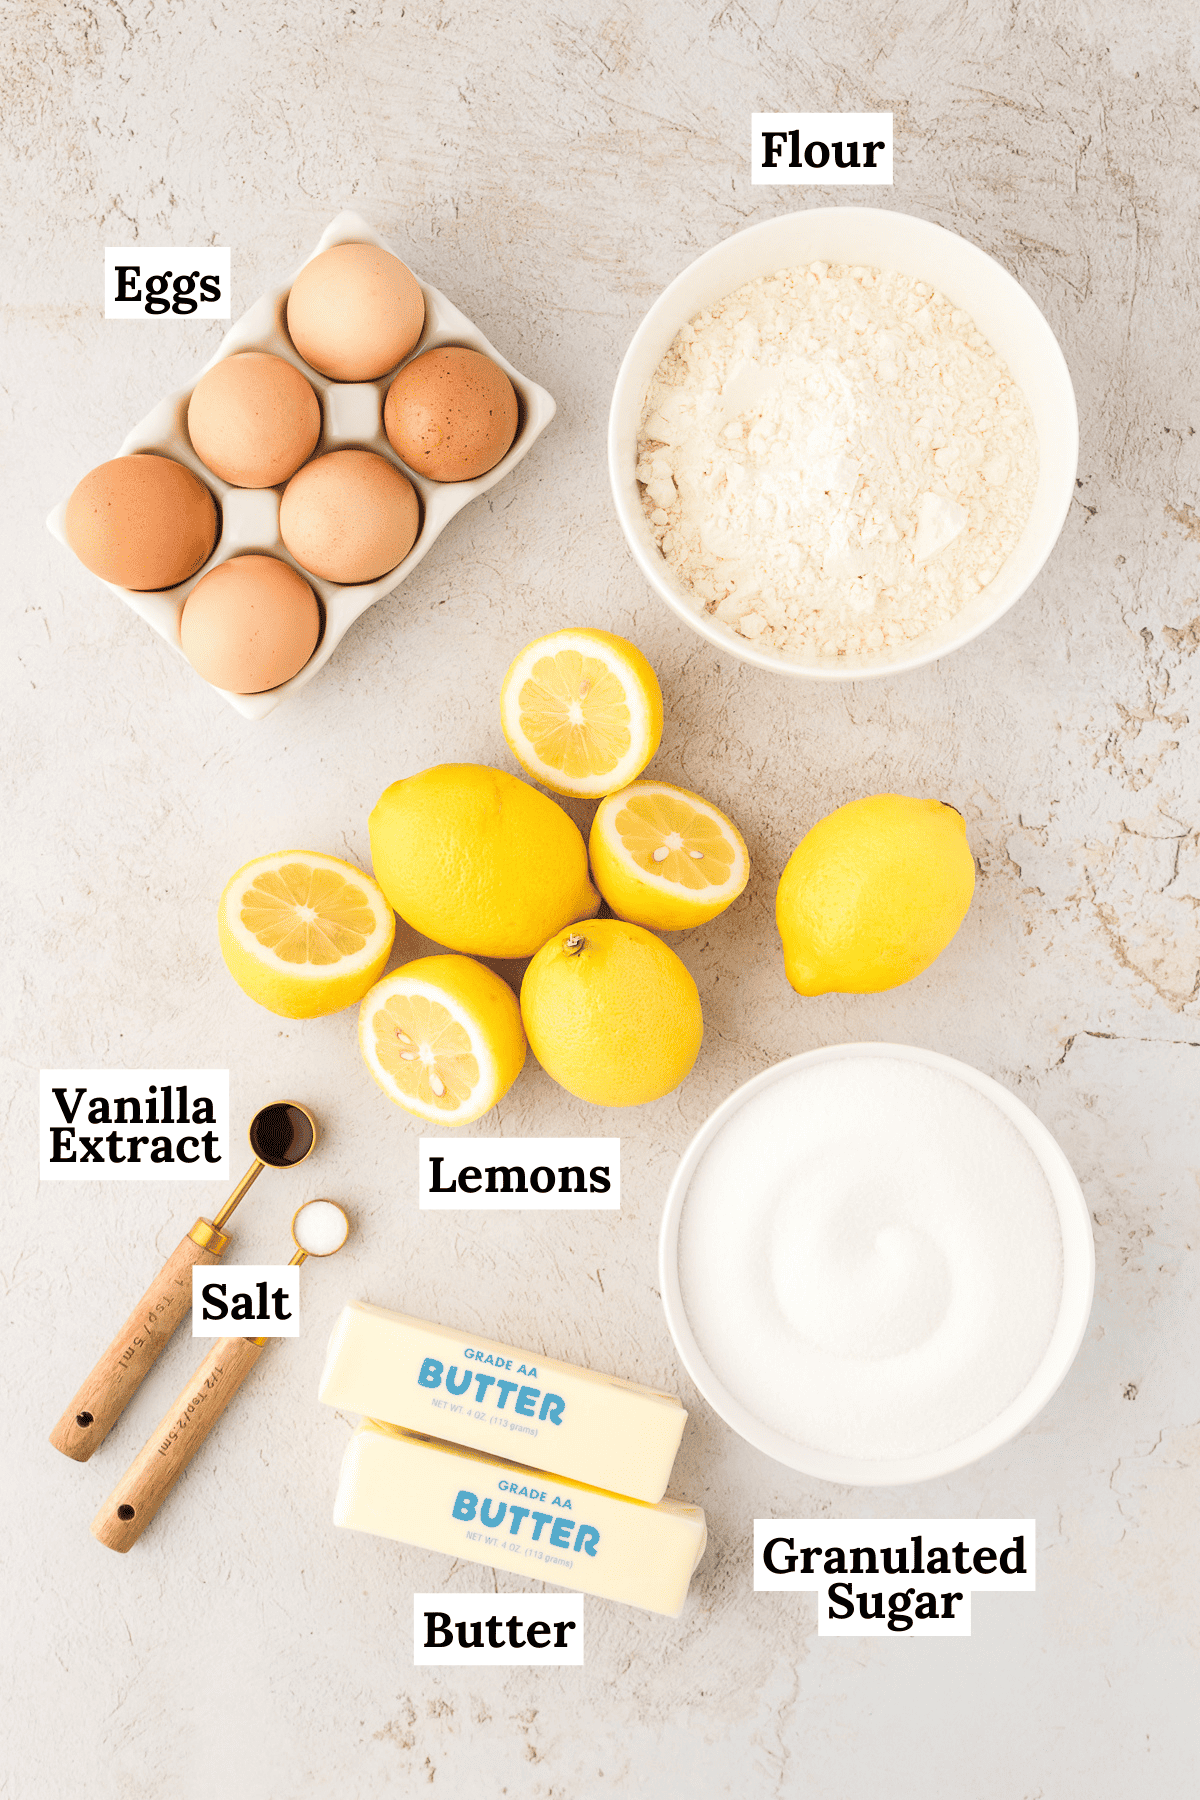 ingredients for lemon bars including eggs, flour, lemons, vanilla extract, granulated sugar, butter, vanilla extract and salt